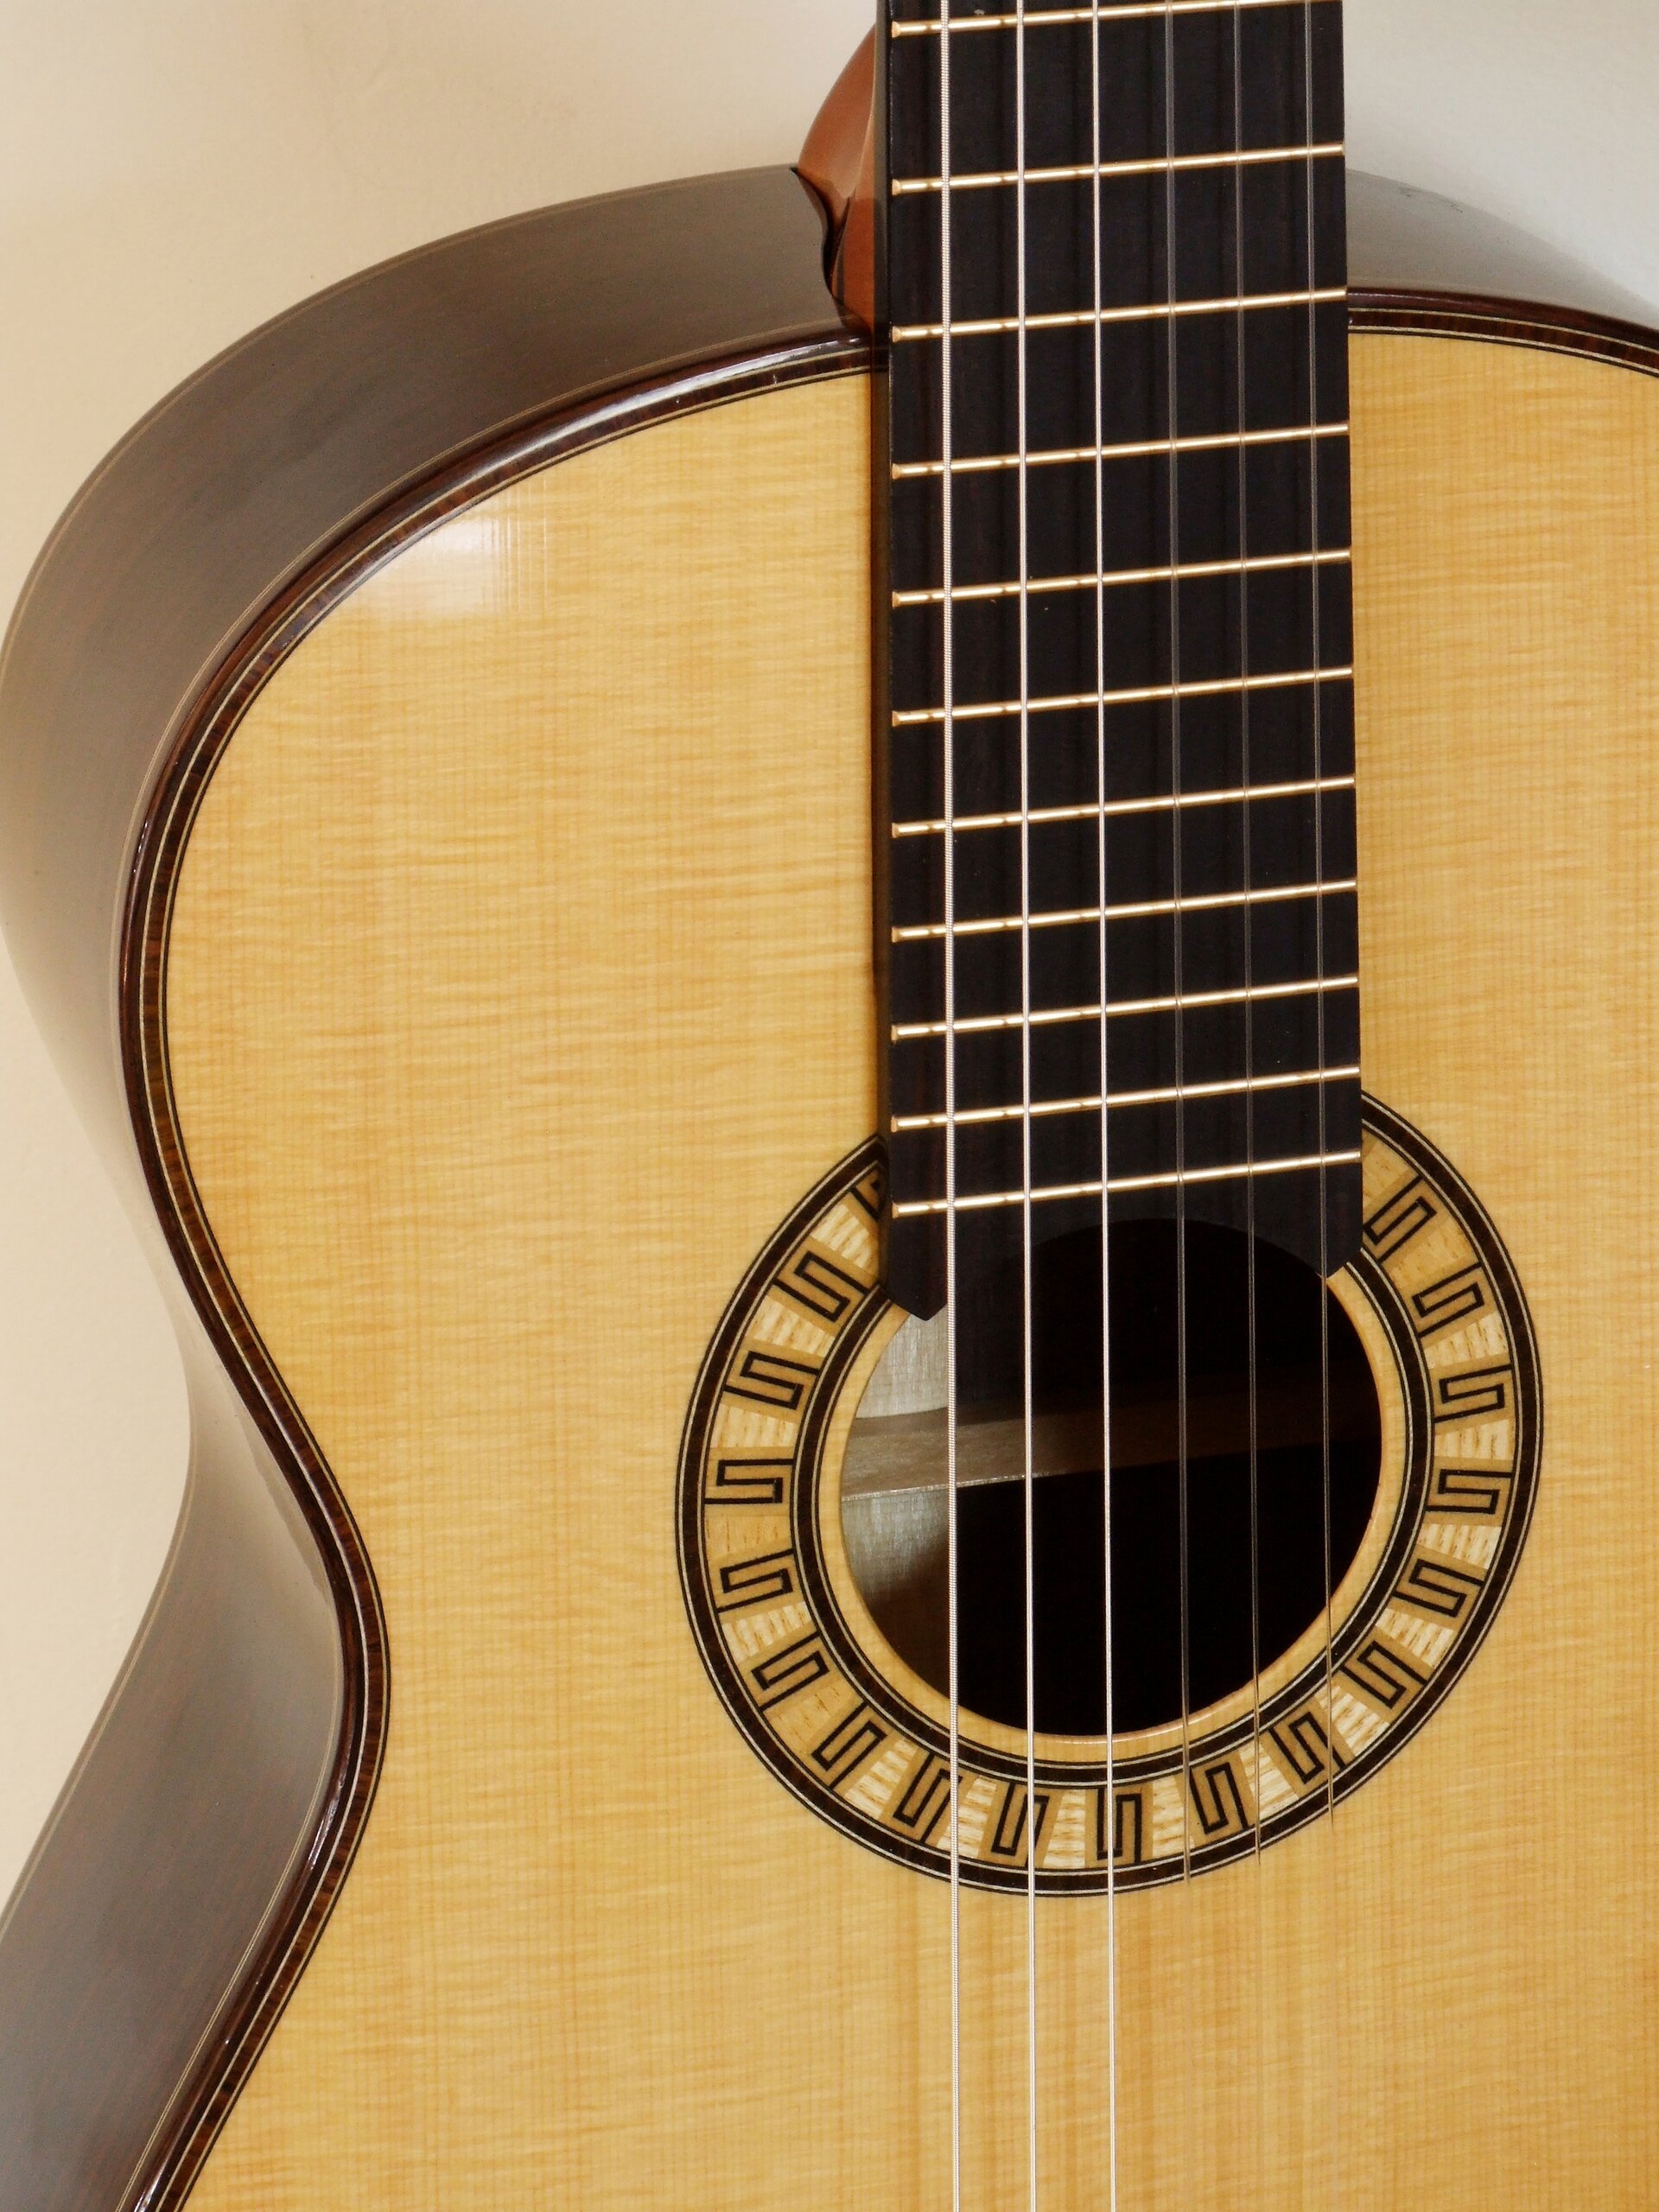 Custom guitars. Small body classical guitar with bold meander rosette